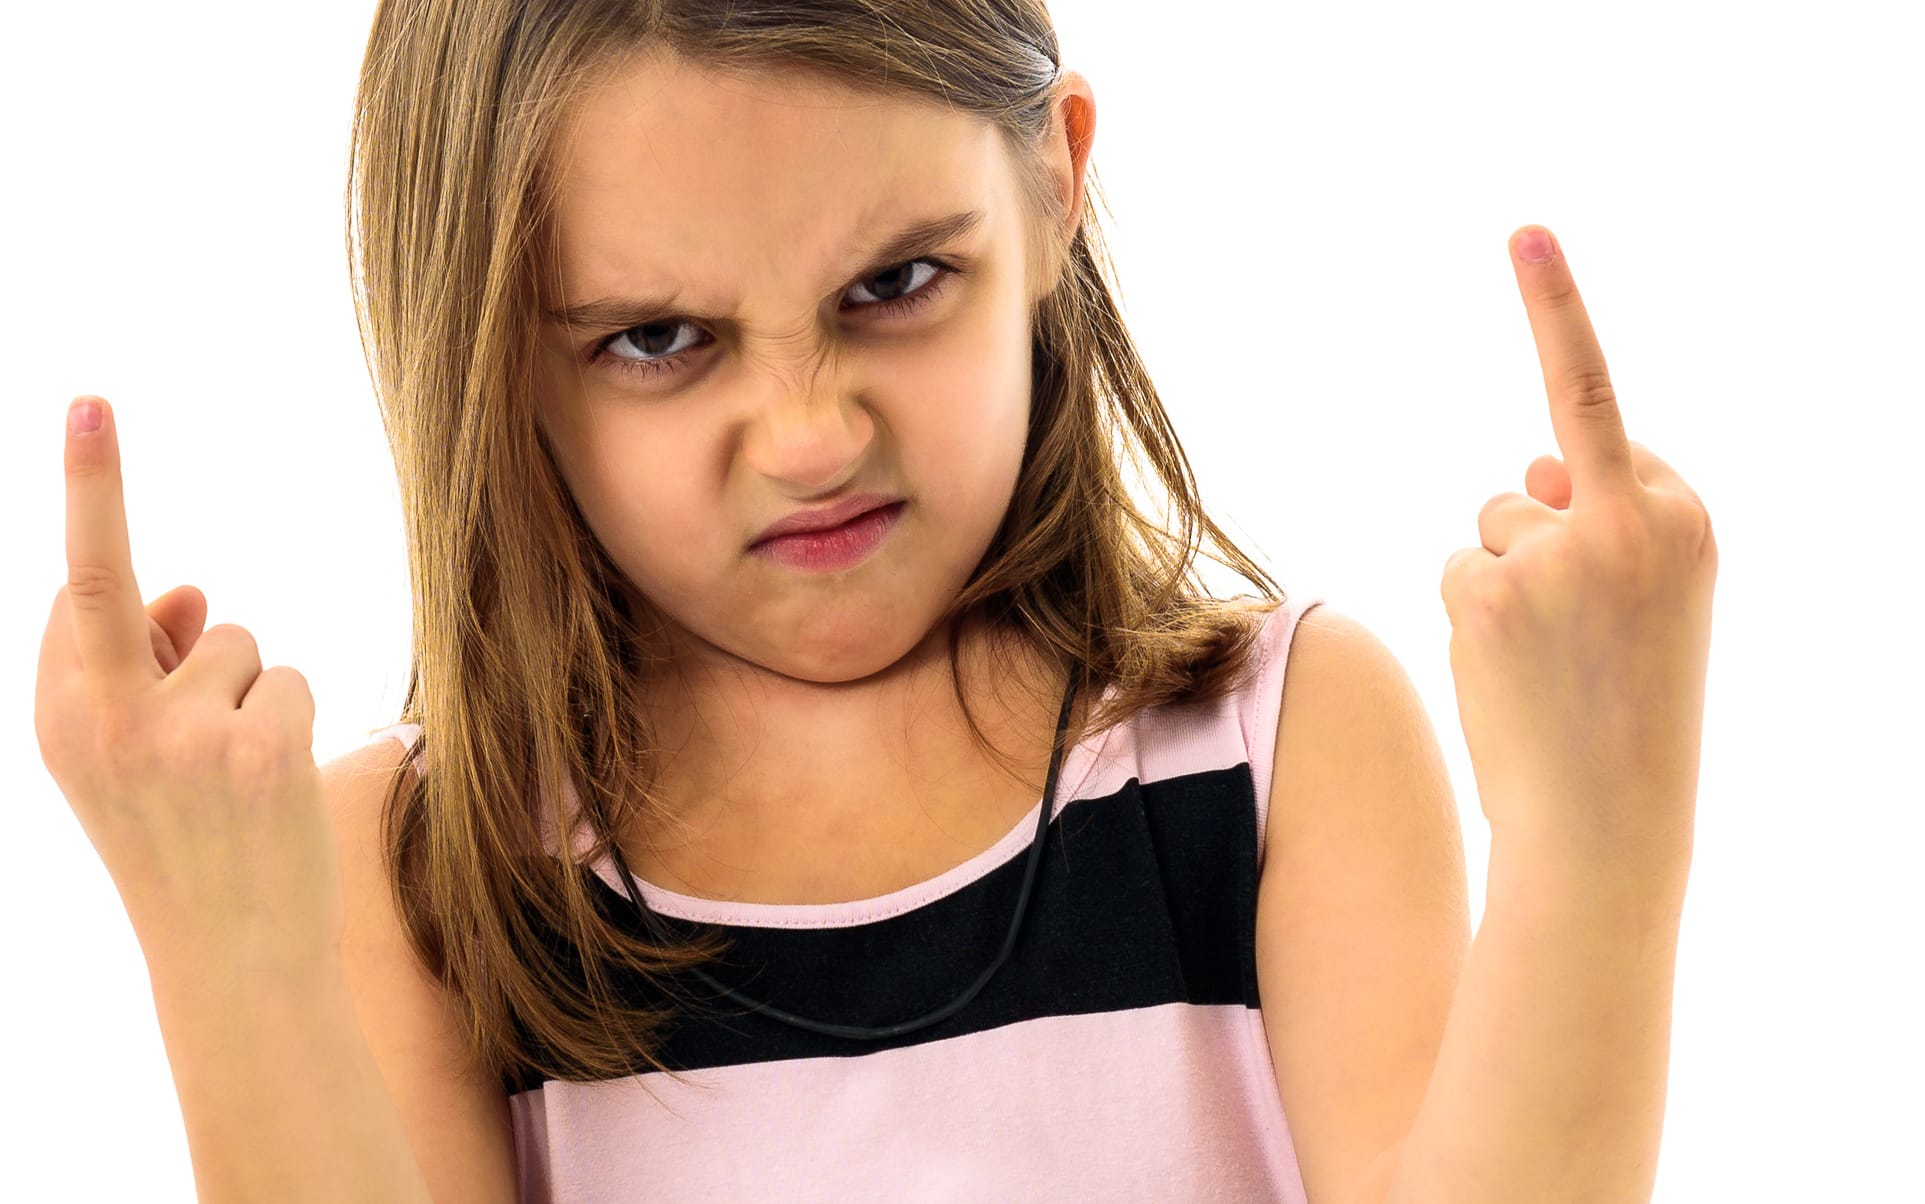 Little young girl is angry, mad, disobedient with bad behaviour. Children making the act of insubordination and disobedience, yelling, flipping off, showing the middle finger. Act of giving the finger.